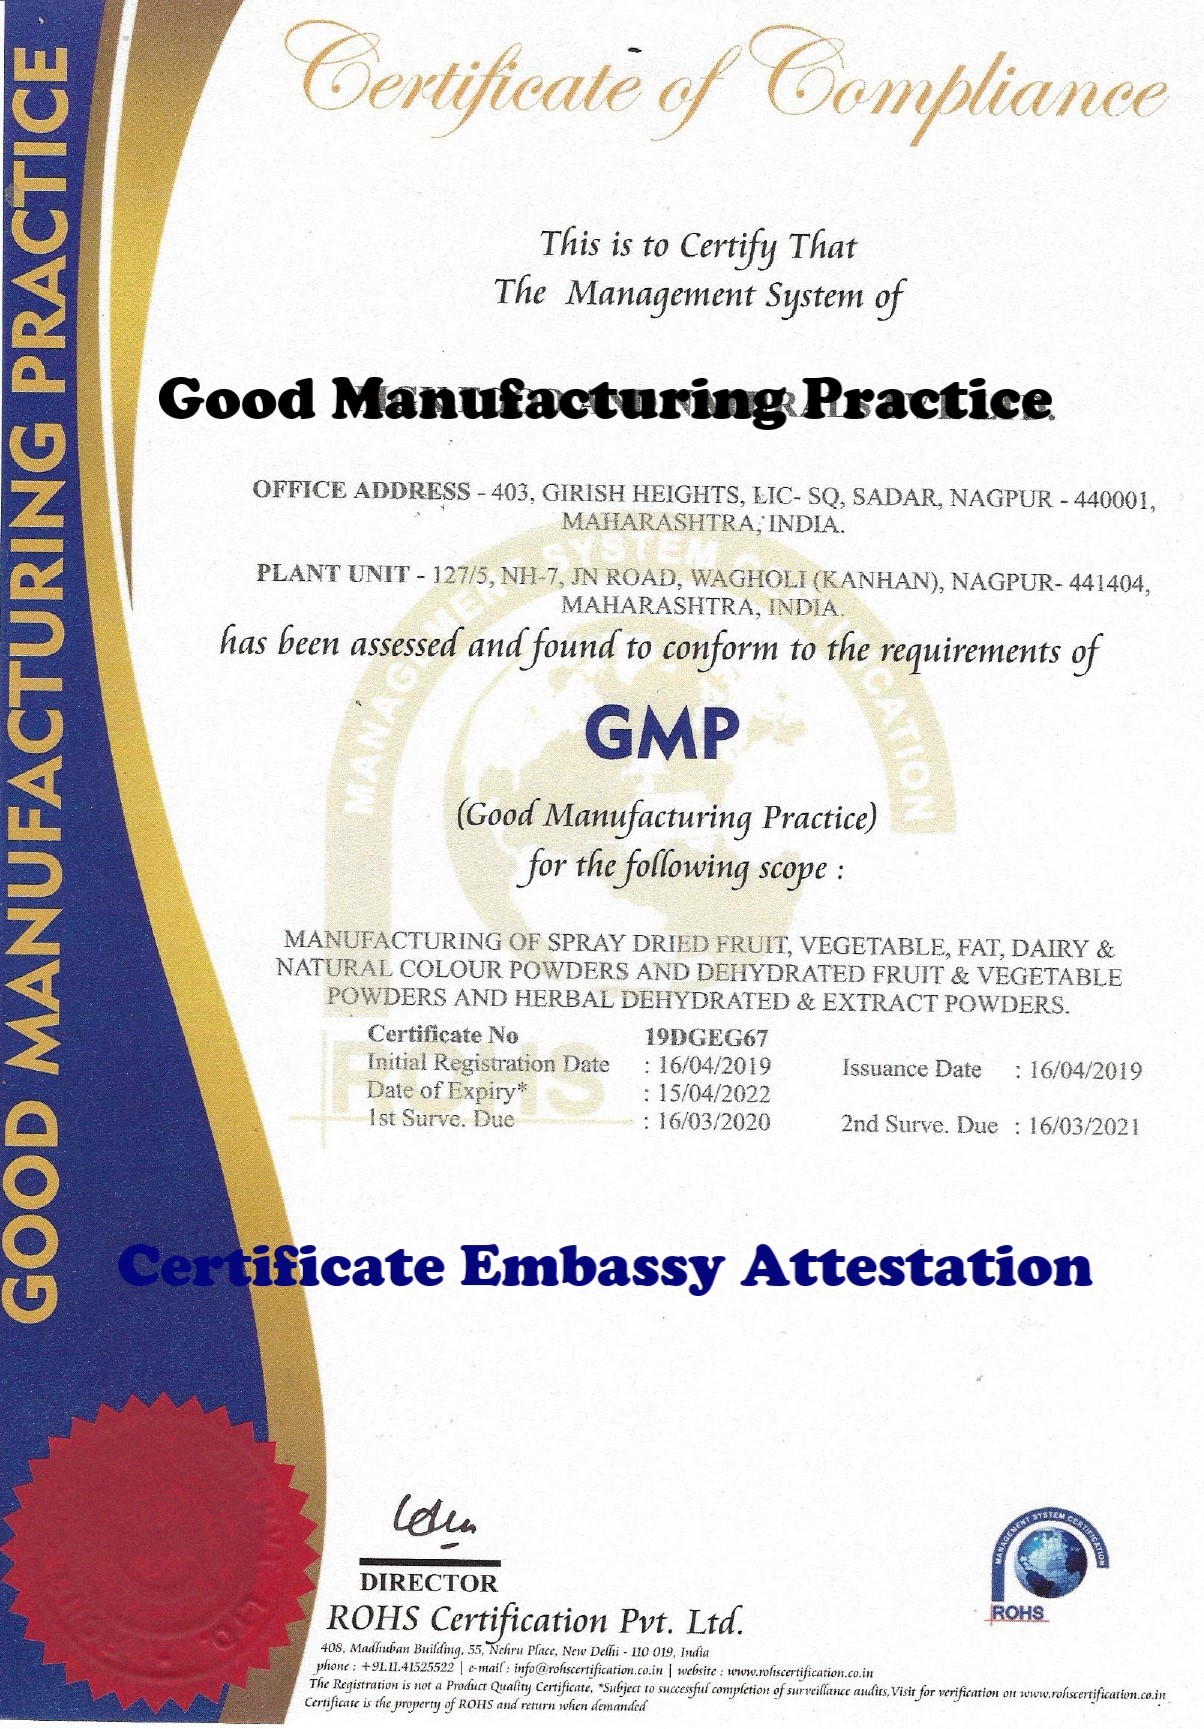 GMP Certificate Attestation from Chad Embassy